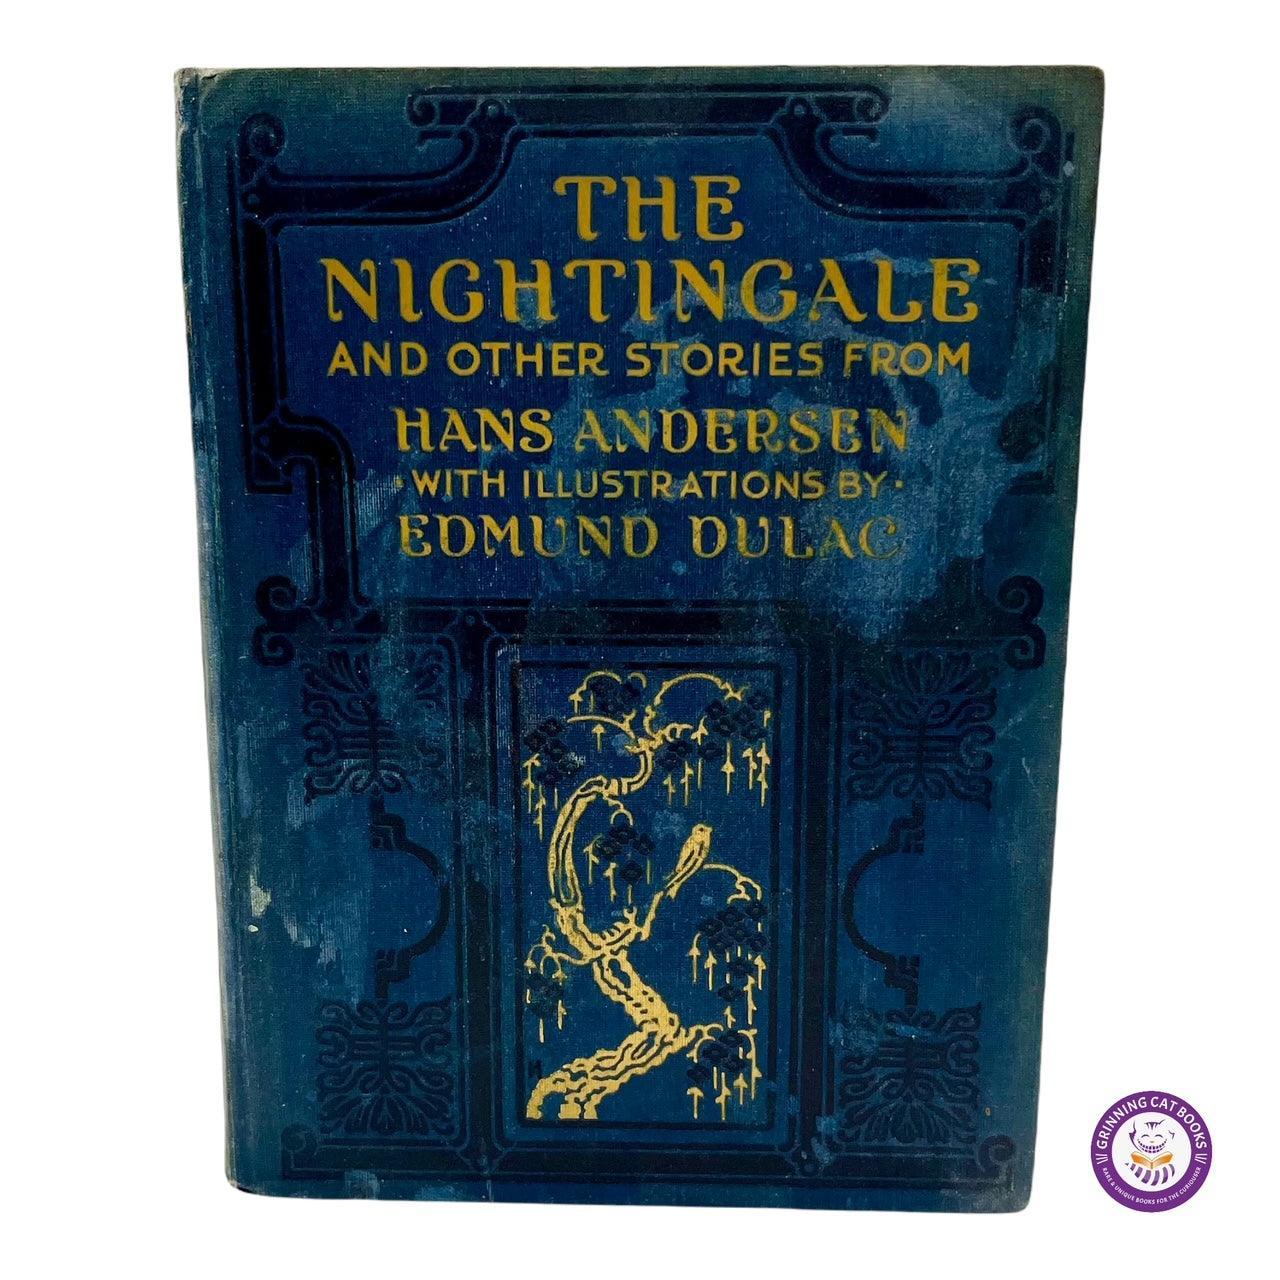 The Nightingale and Other Stories From Hans Christian Andersen (illustrated by Edmund Dulac) - Grinning Cat Books - CHILDREN'S LITERATURE - ILLUSTRATED